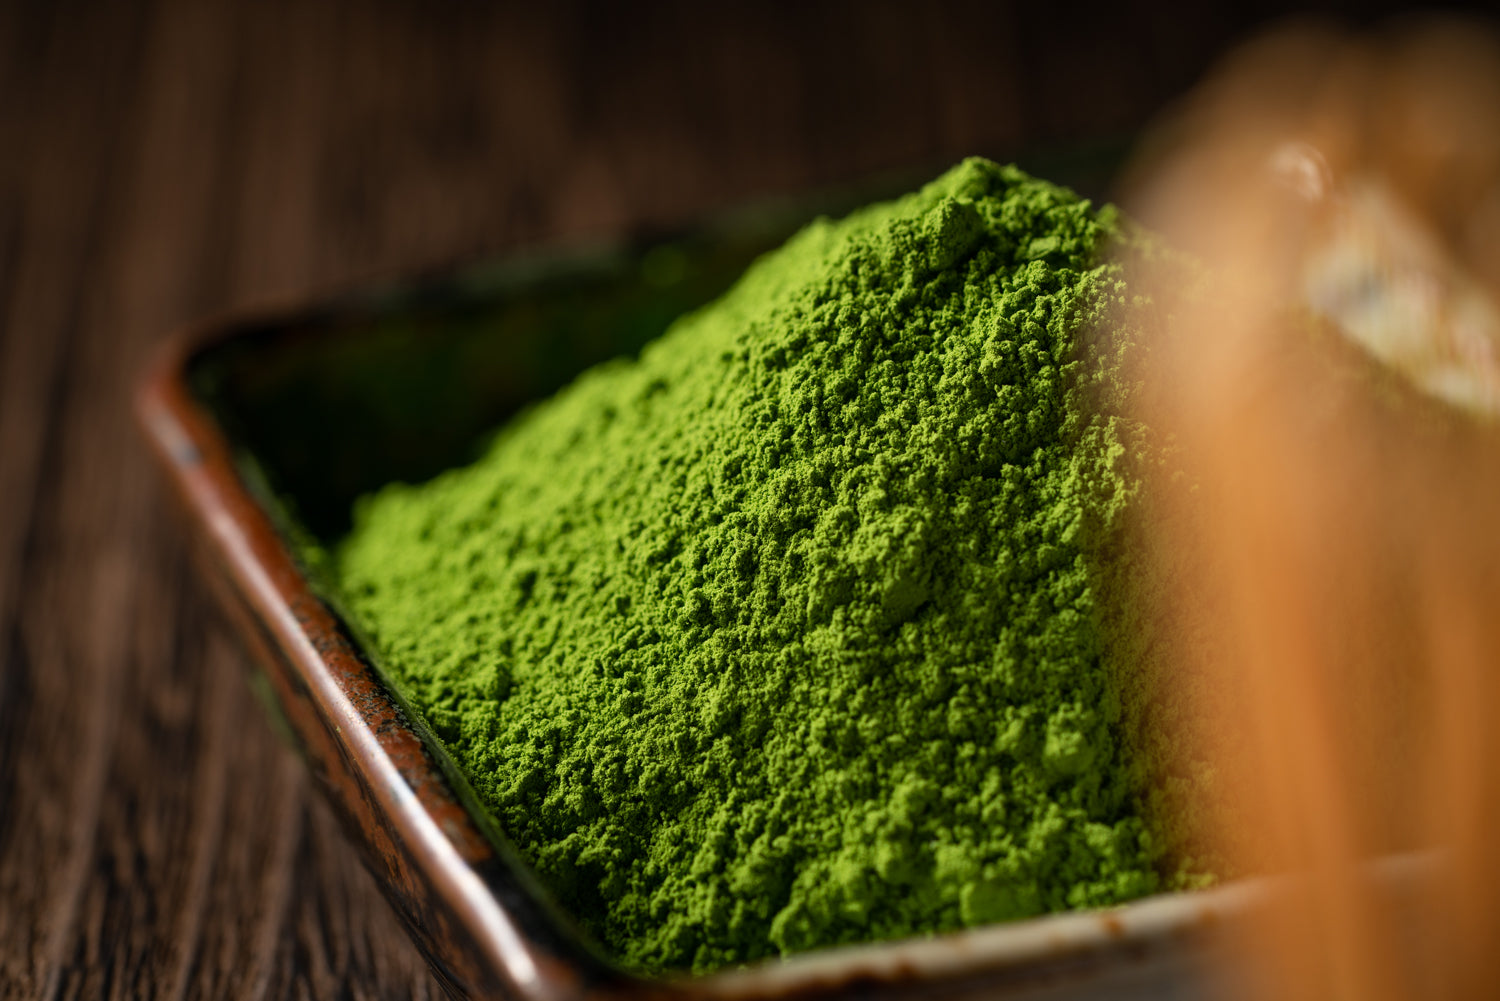 Bright green matcha powder piles high in a rustic-looking tea container.